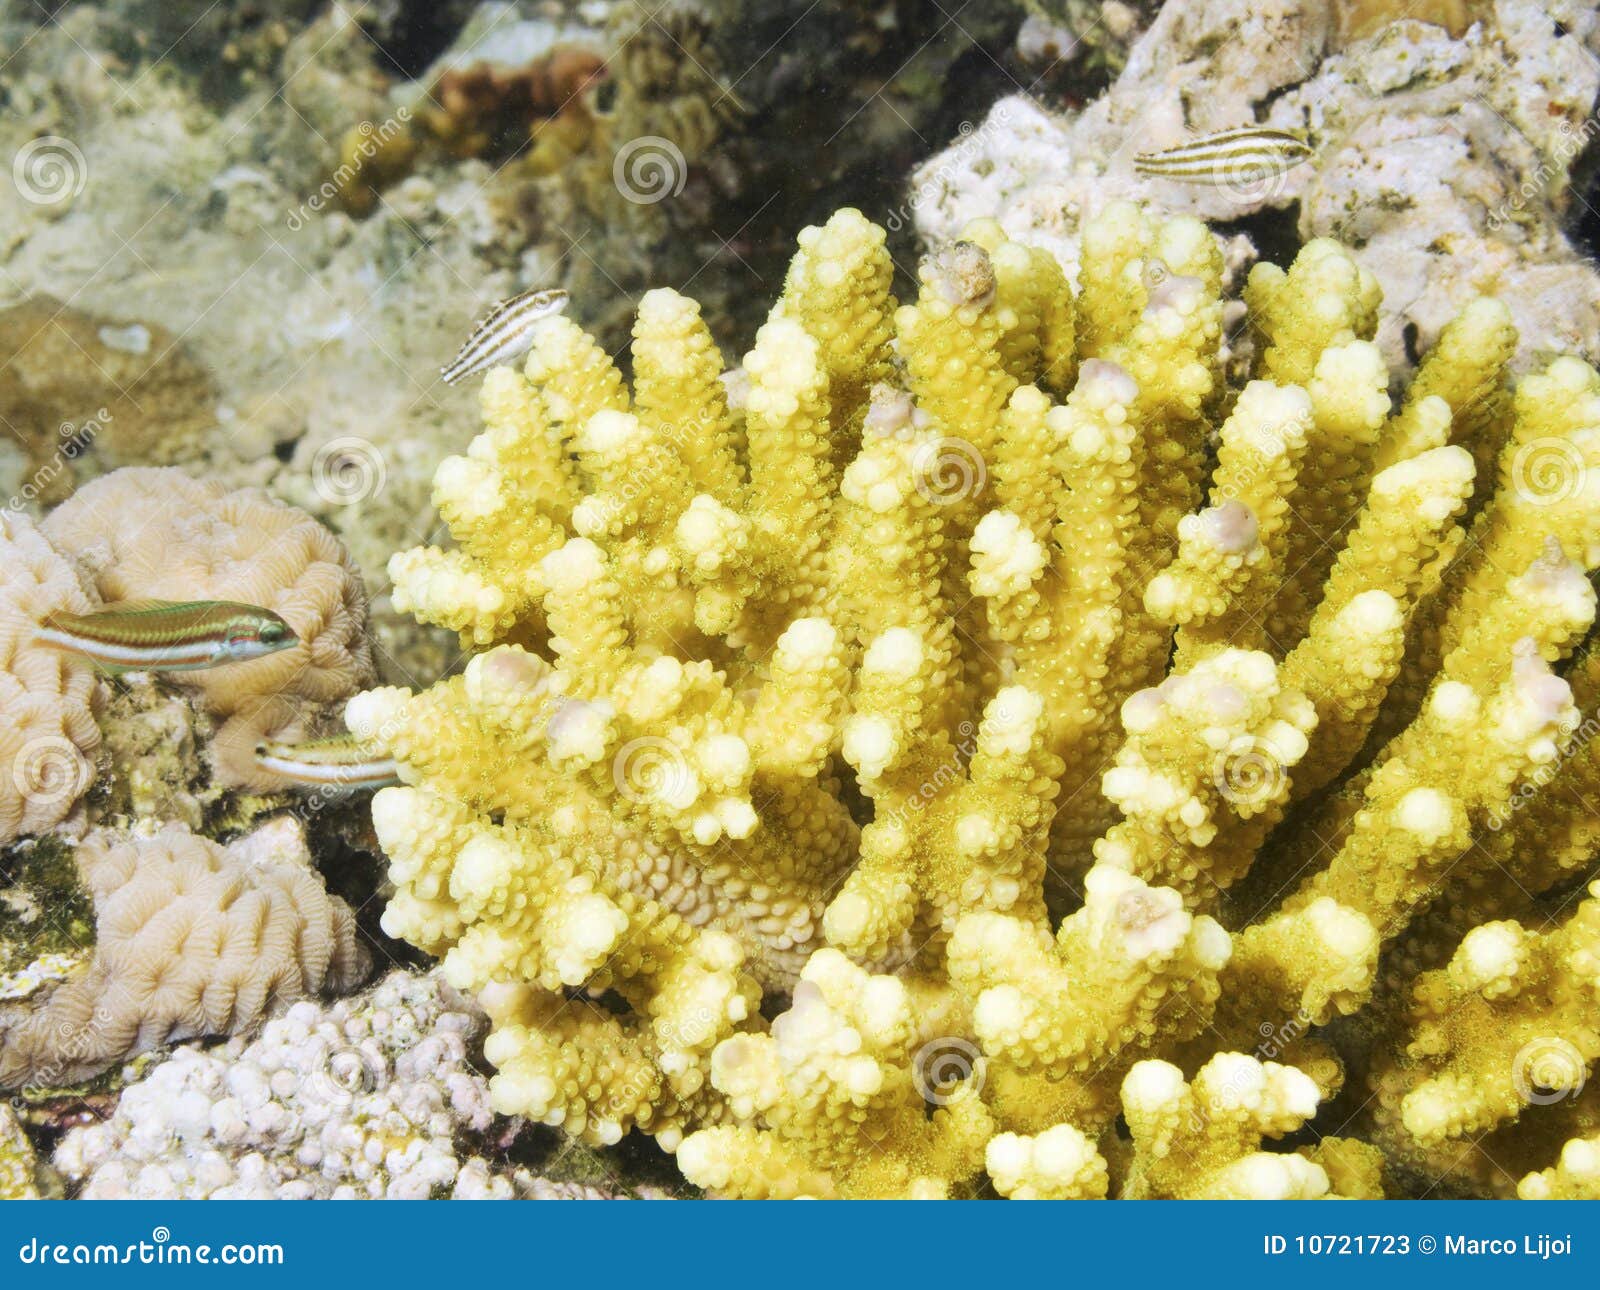 Acropora Coral in the reef stock image. Image of skeleton - 10721723